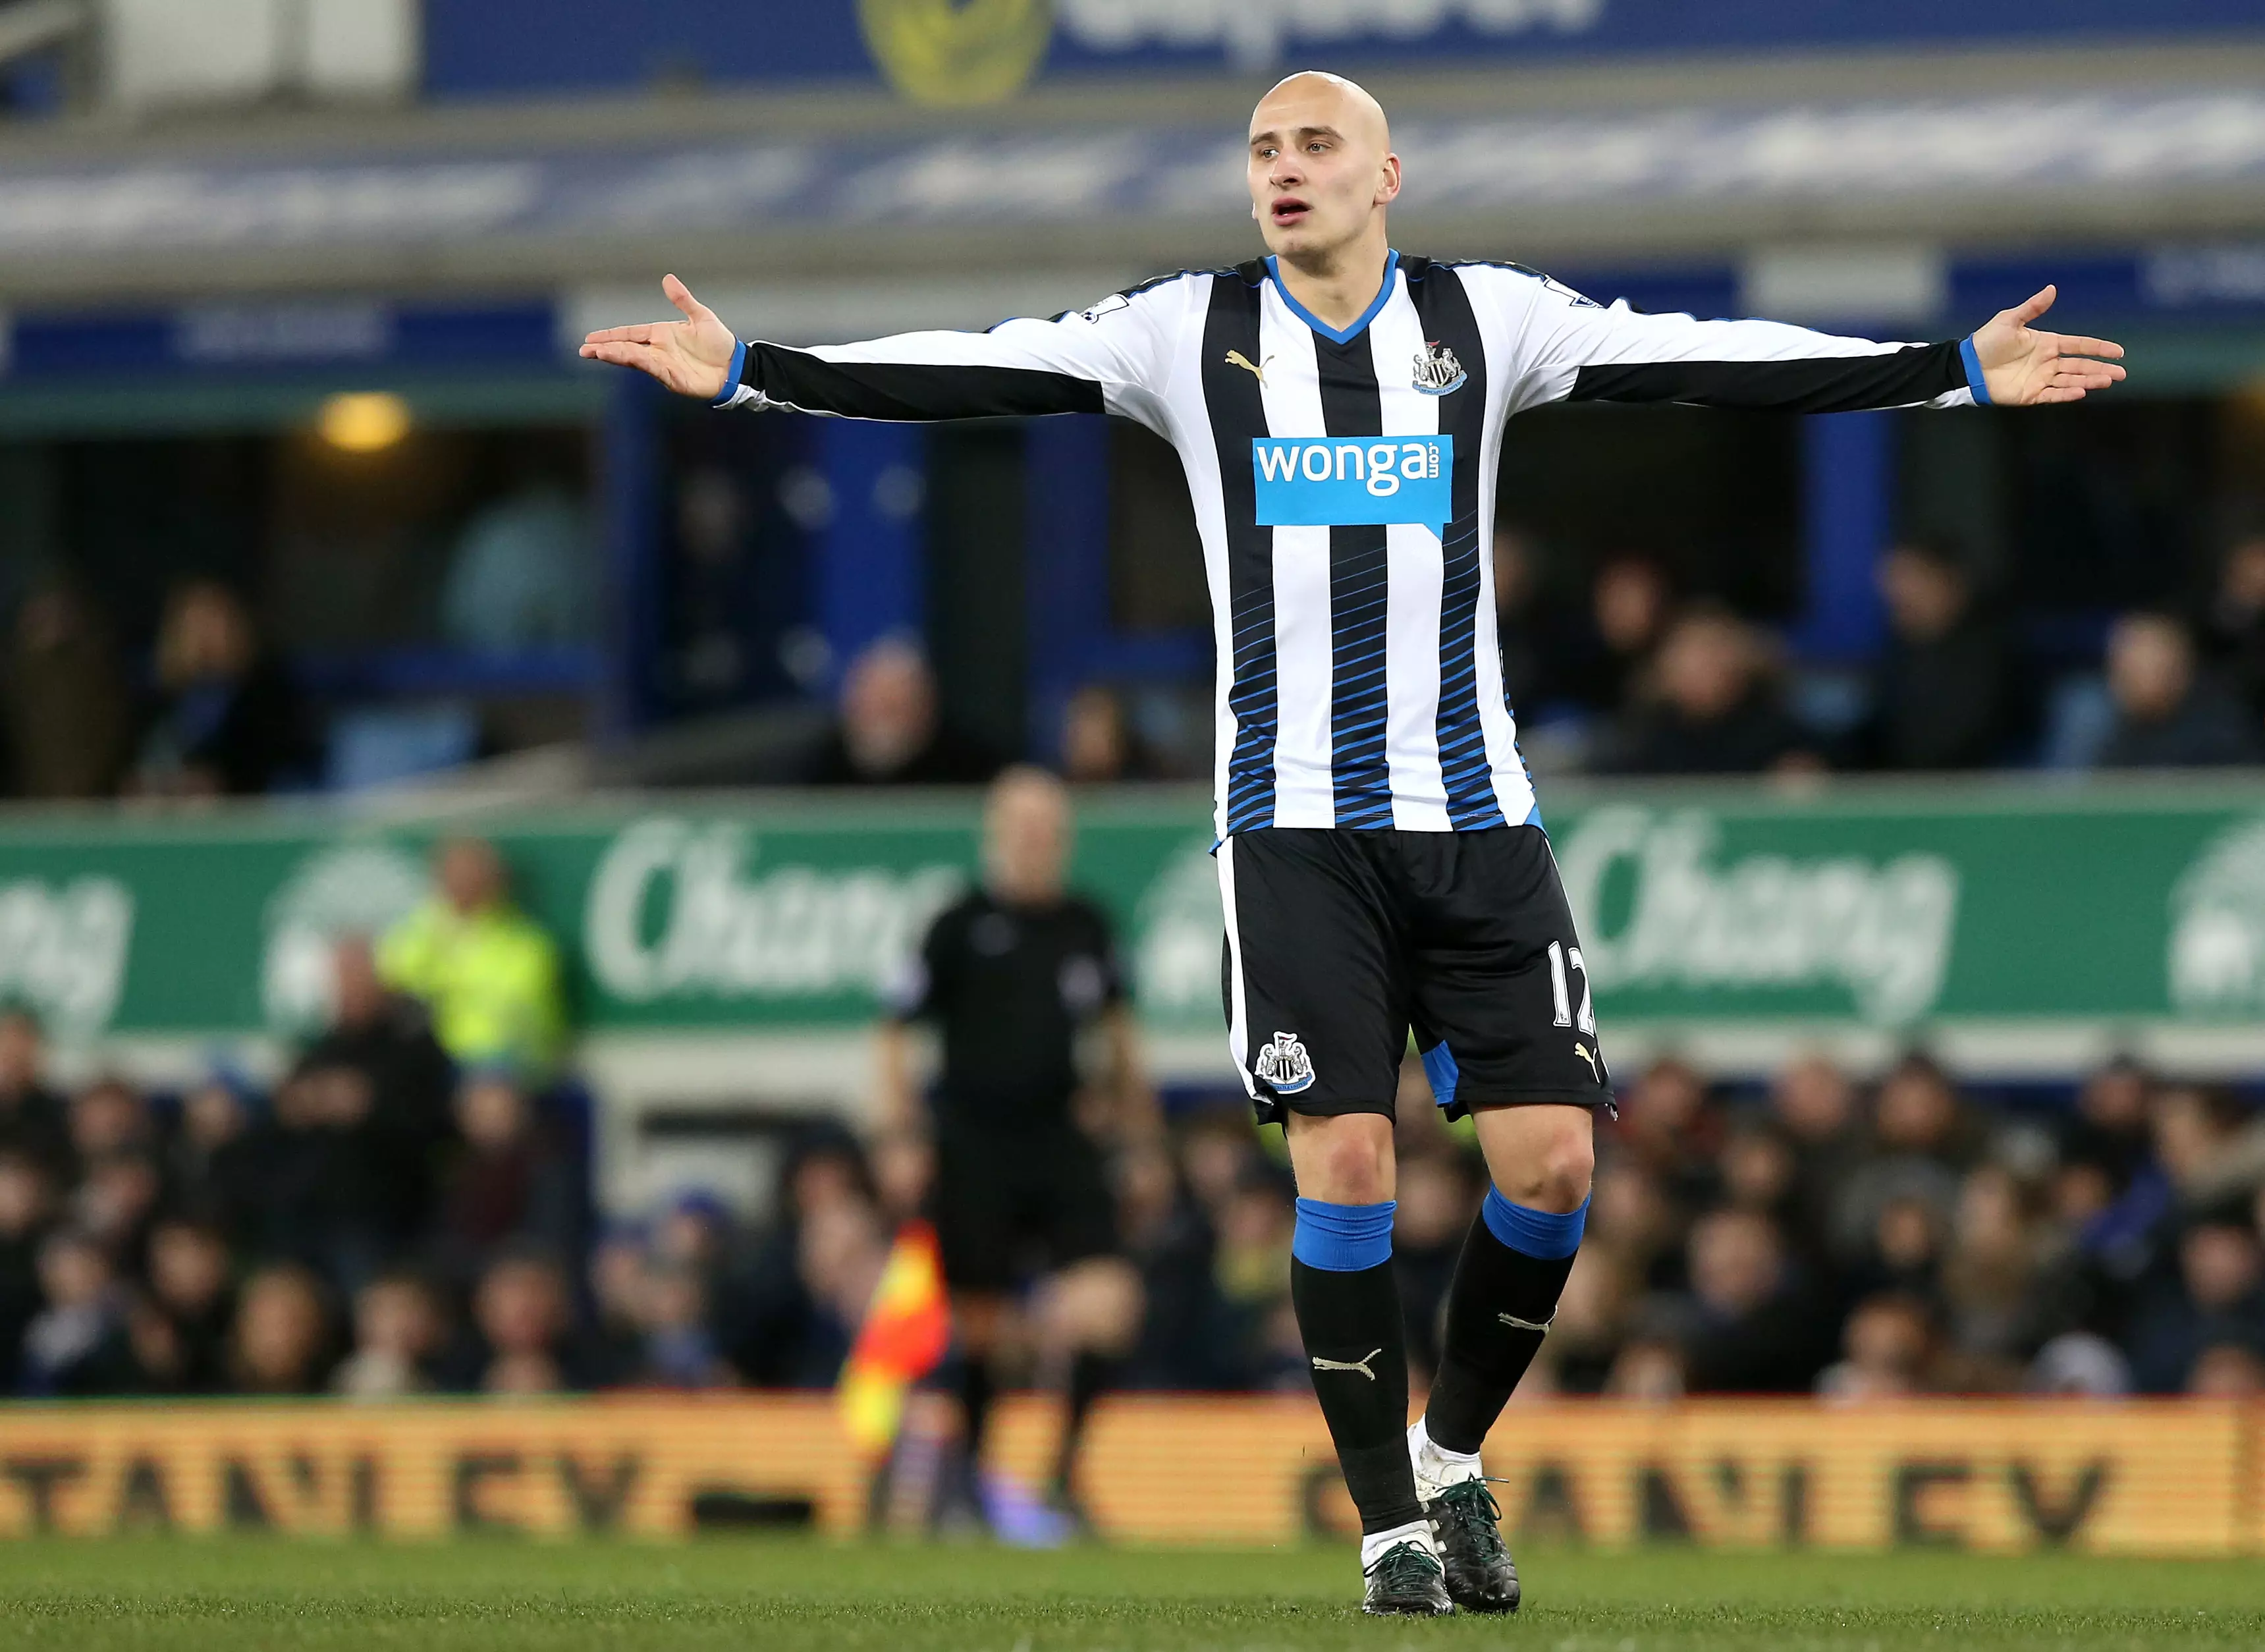 BREAKING: Jonjo Shelvey Charged With Abusing Opponent